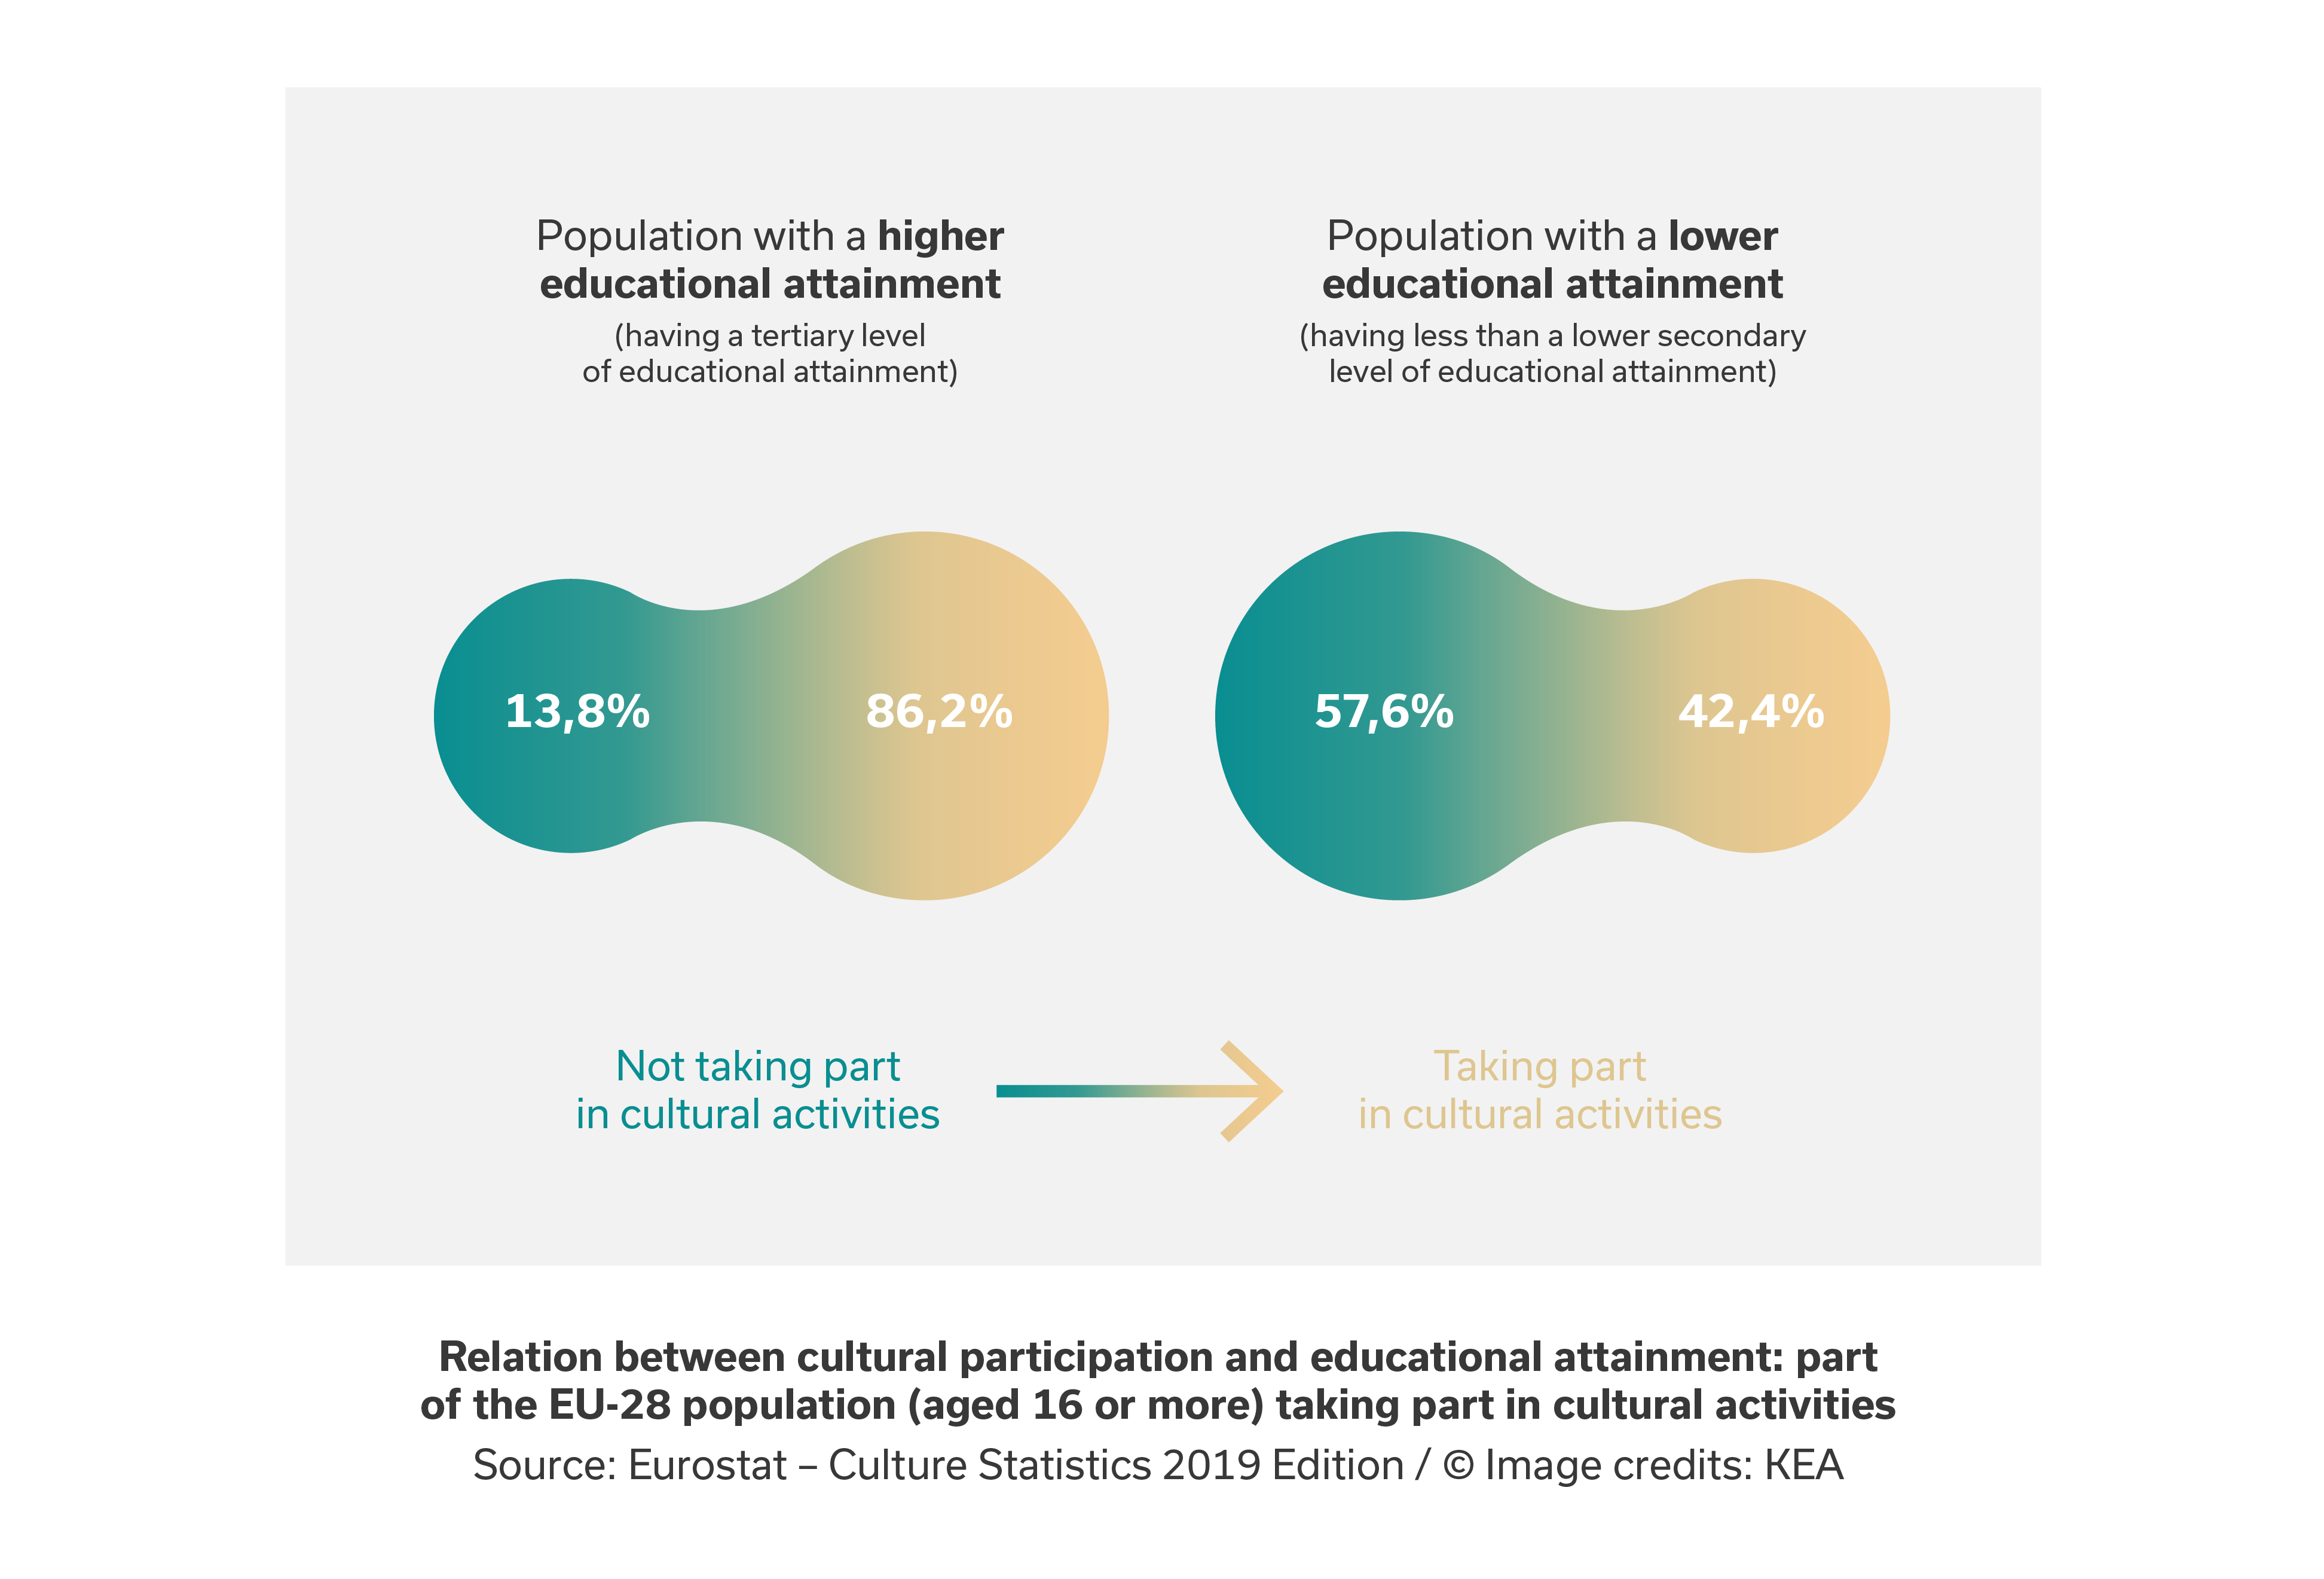 Infographics highlithing the relation between cultural participation and educational attainment in the EU-28 adult population